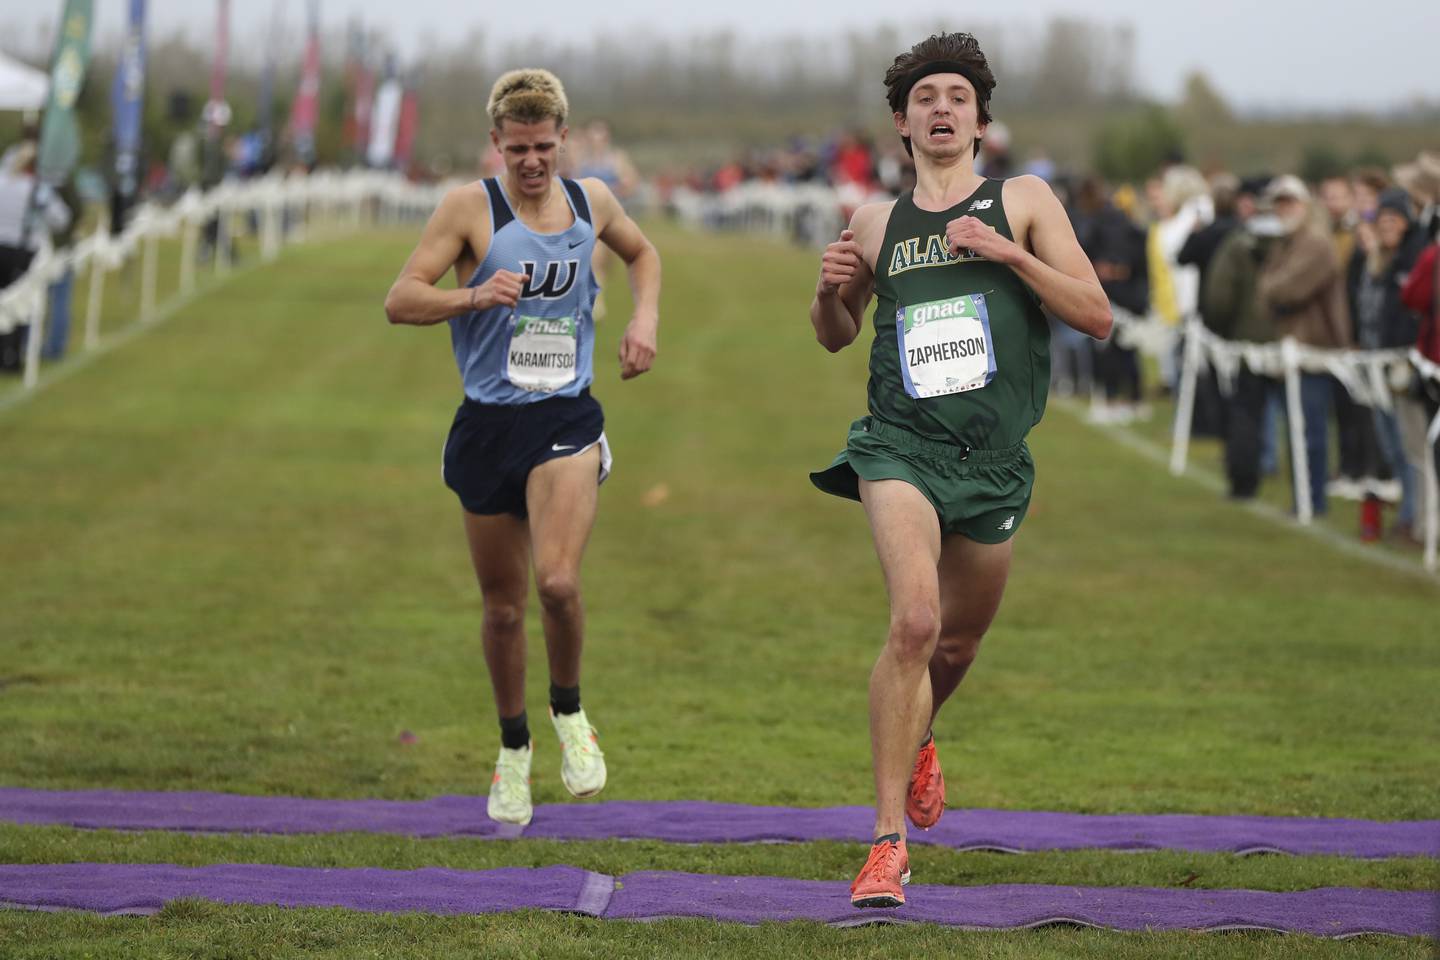 UAA's Michael Zapherson runs through the finish line during the Great Northwest Athletic Conference cross country championship